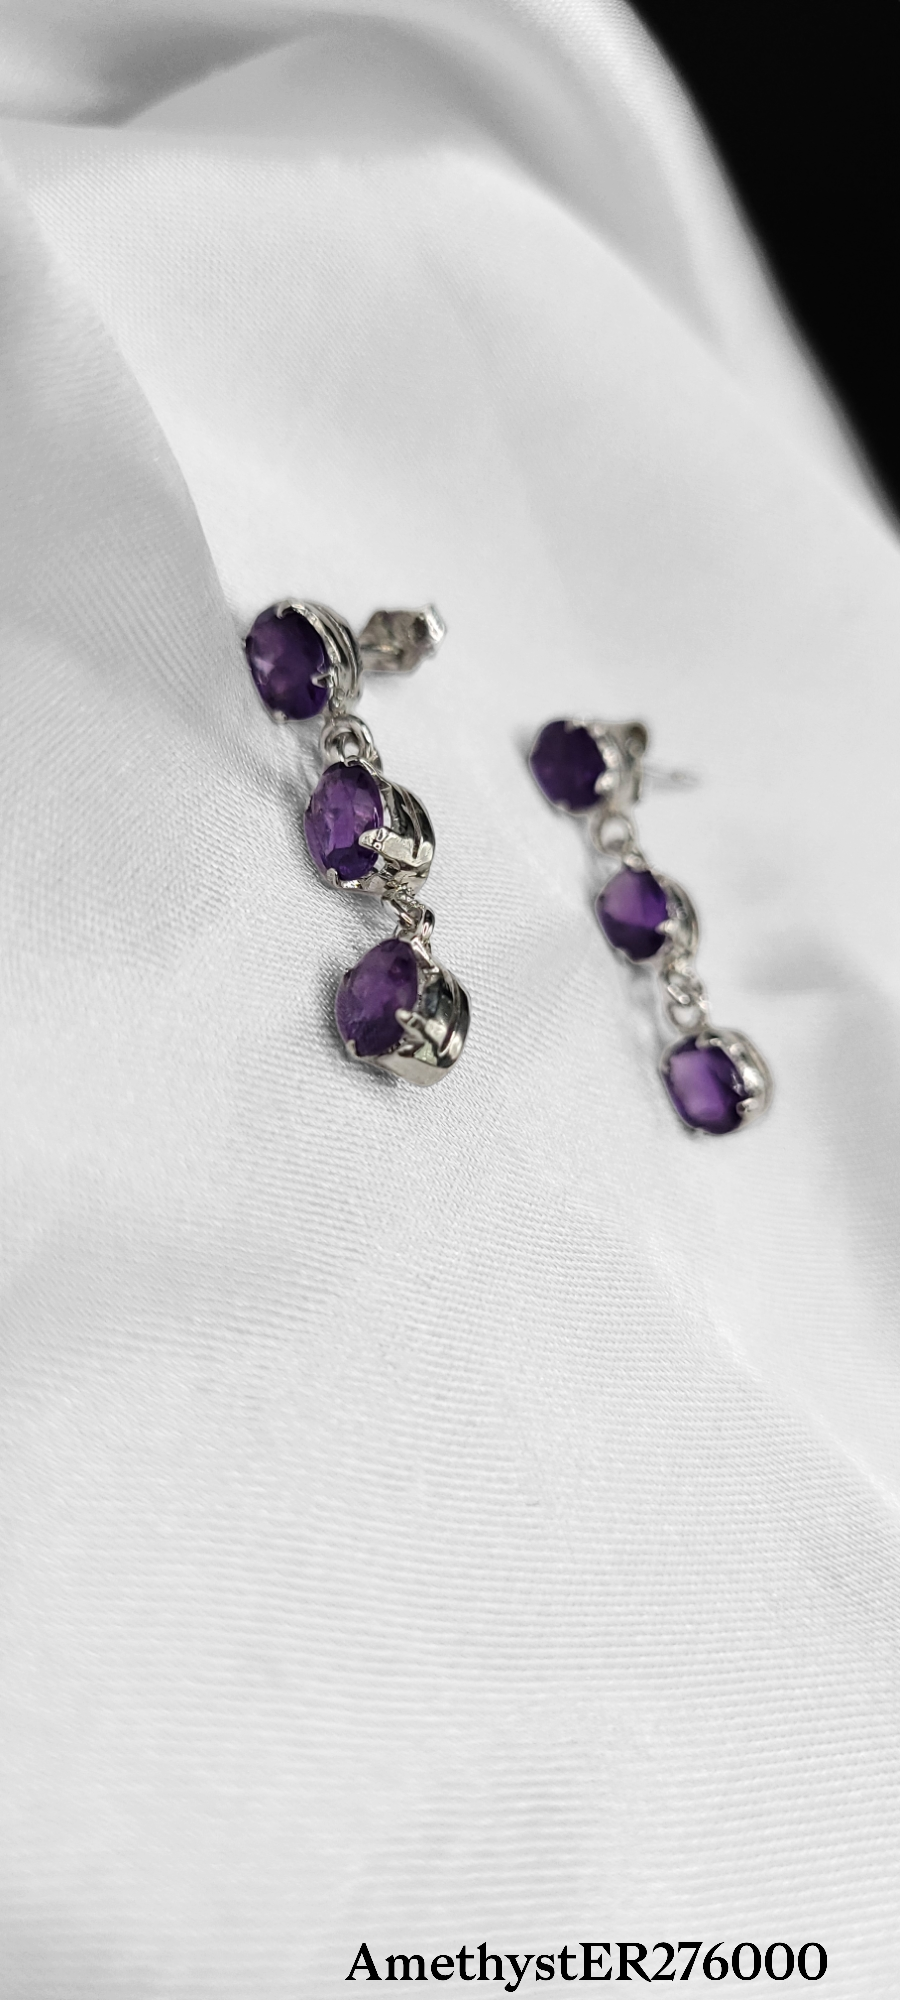 BEAUTIFUL AMETHYST DANGLE STYLE EARRINGS ON STERLING SILVER. AMETHYST IS RECOGNIZED AS A STONE OF SPIRITUALITY & CONTENTMENT.